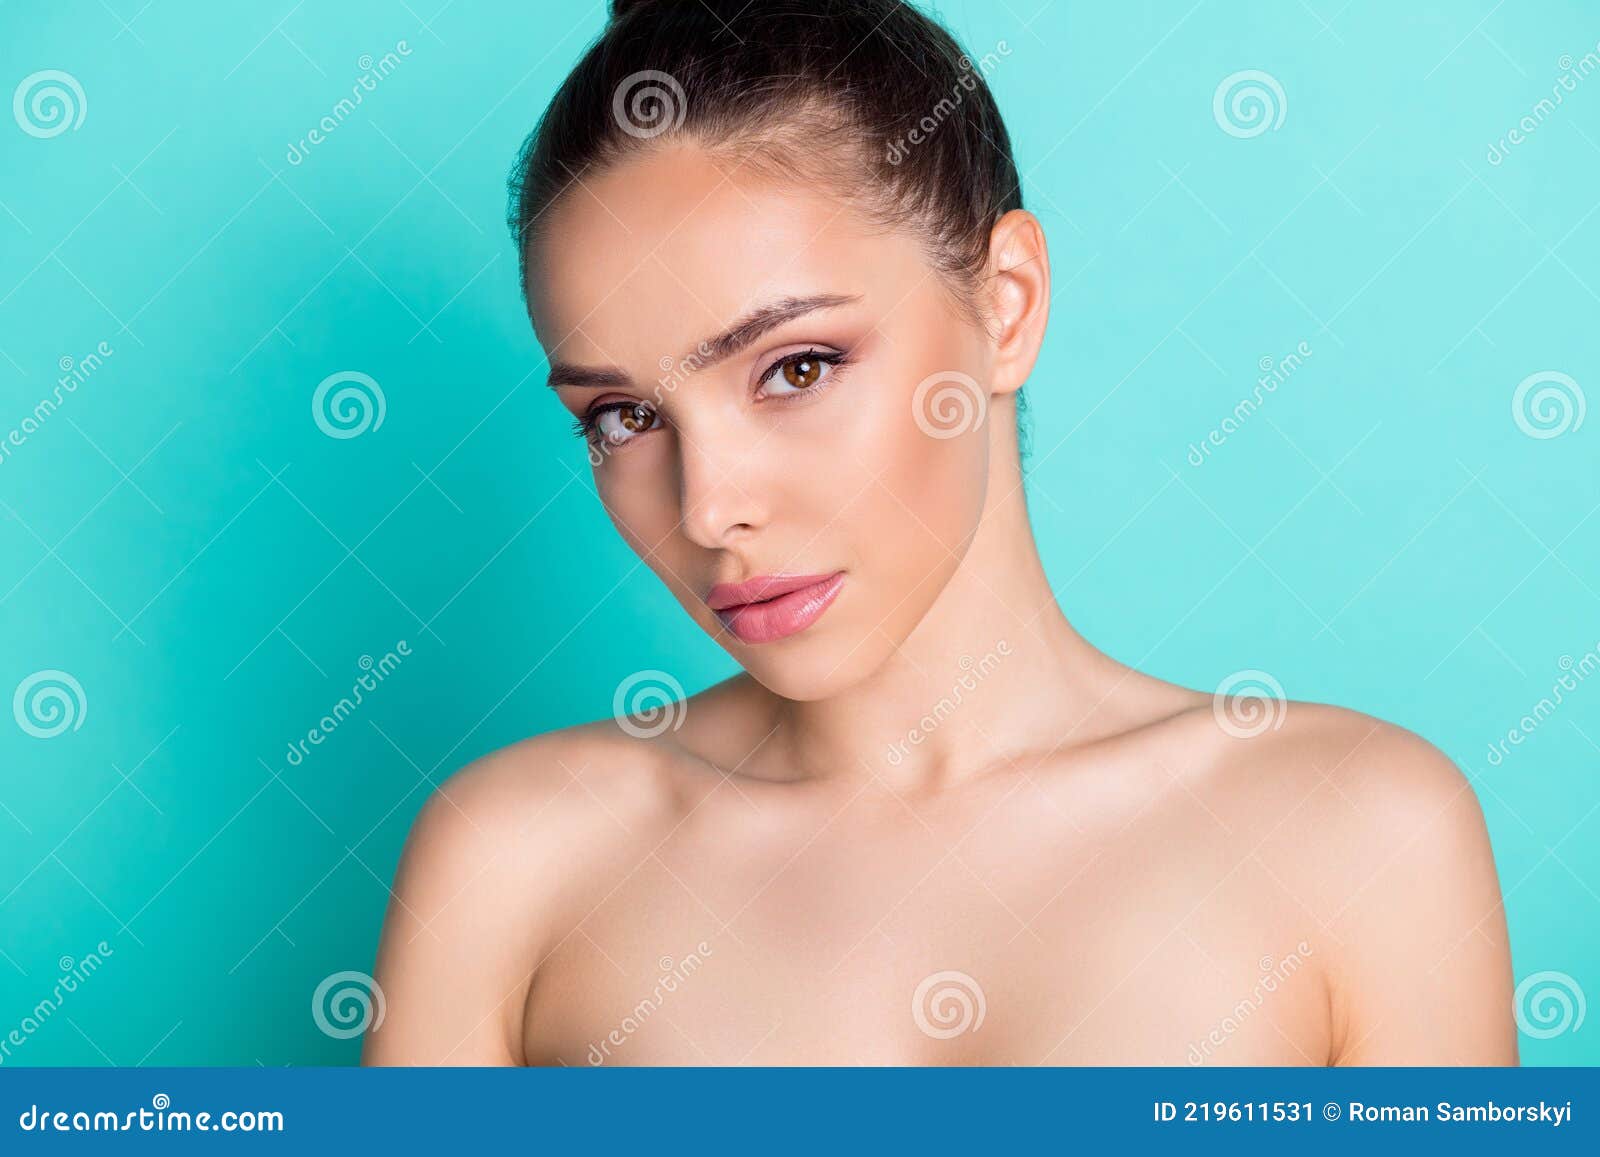 Women With No Clothes On x rimjob